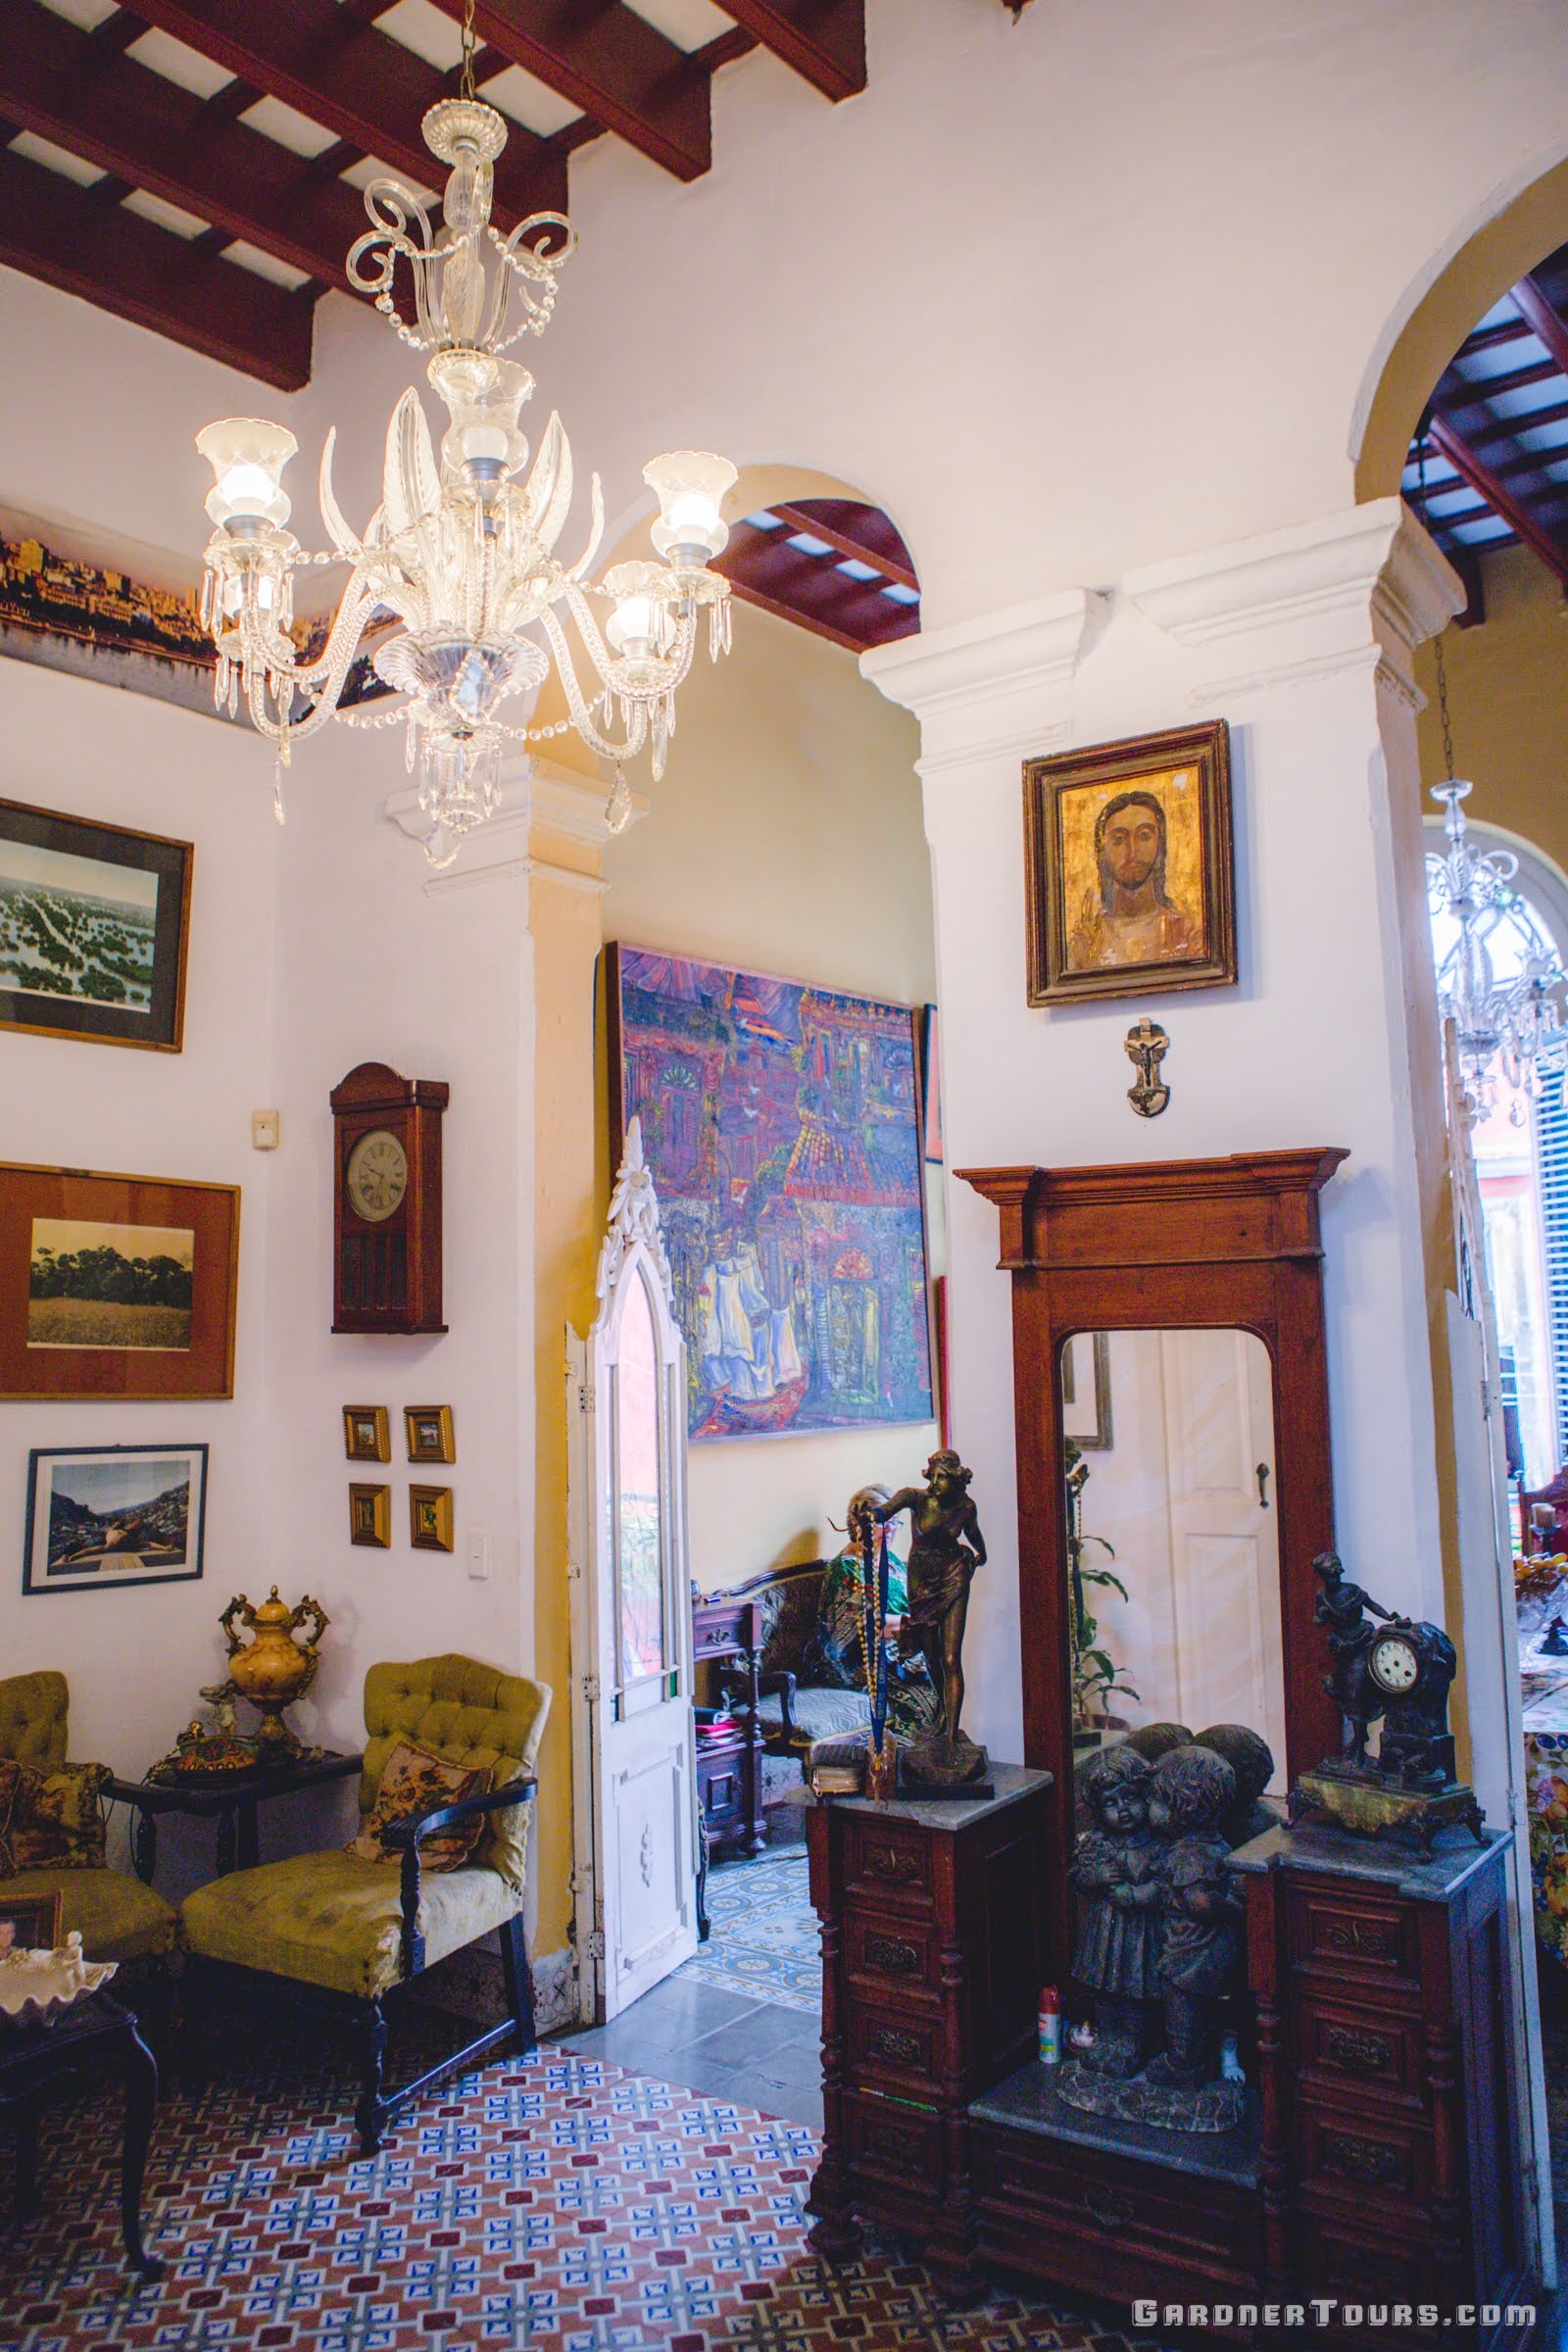 Gardner Tours Beautiful Colorful Living Room with Paintings, a Jesus Painting from the 1500s, and Ornate Tiled Floors at a Private BnB in Havana, Cuba